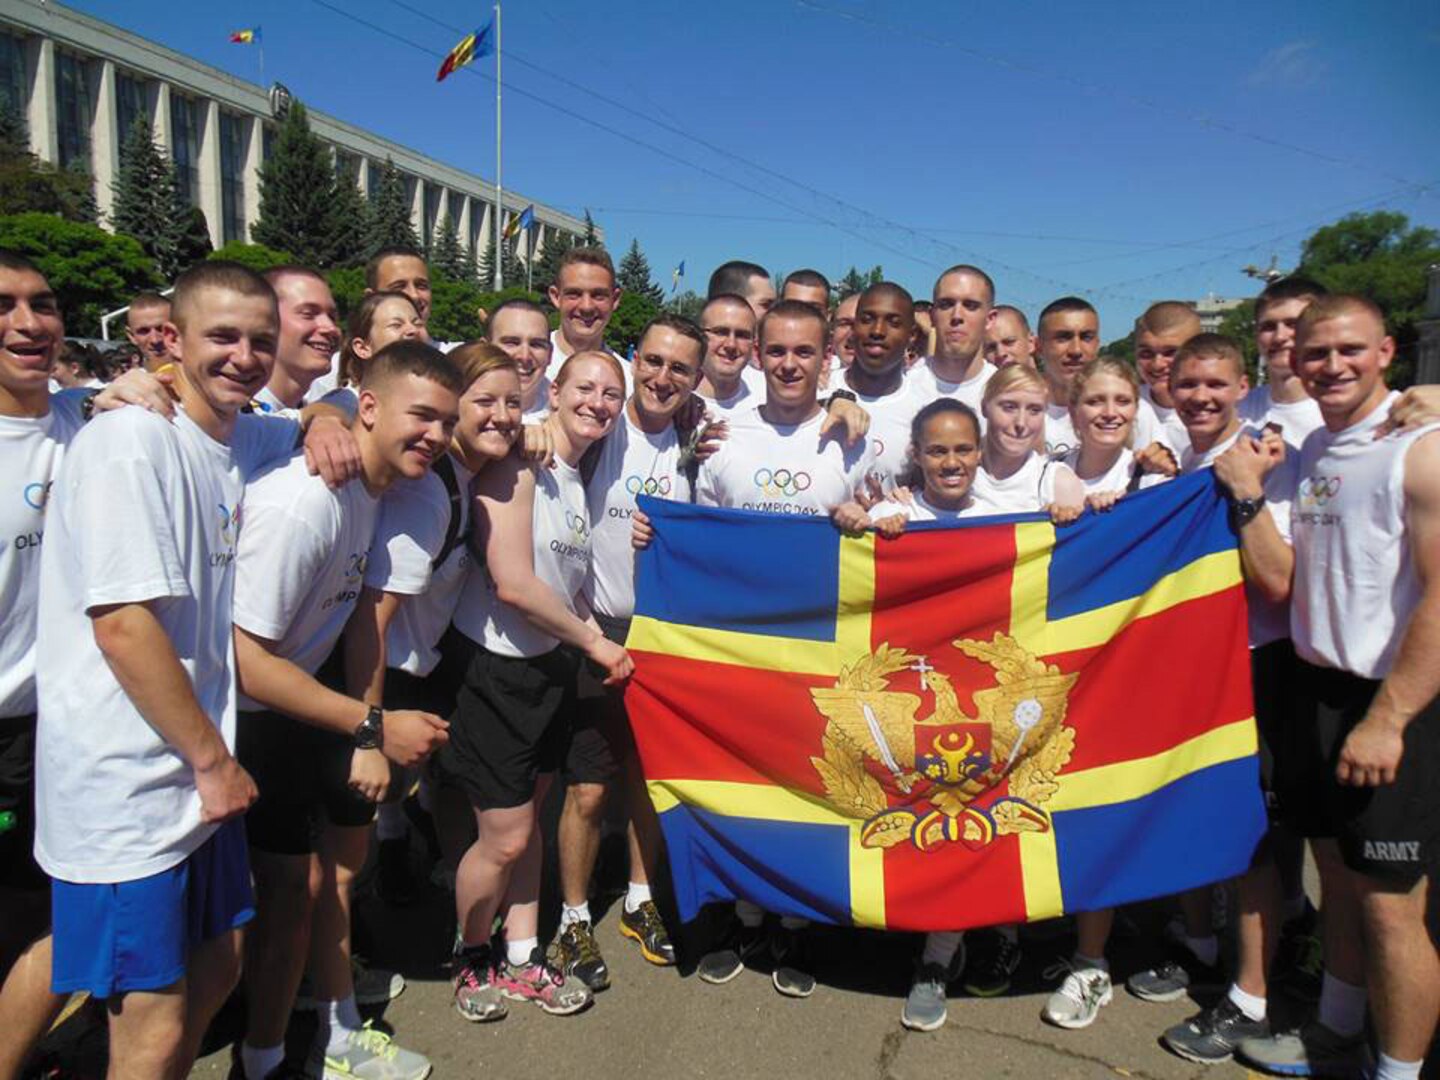 Army ROTC students from the United States take a quick moment to celebrate during the Army Cadet Command's ROTC Cultural Understanding and Language Program (CULP) to Moldova. The CULP is one of many ways the North Carolina National Guard seeks to partner with Moldova, the organization's State Partnership Program partner.